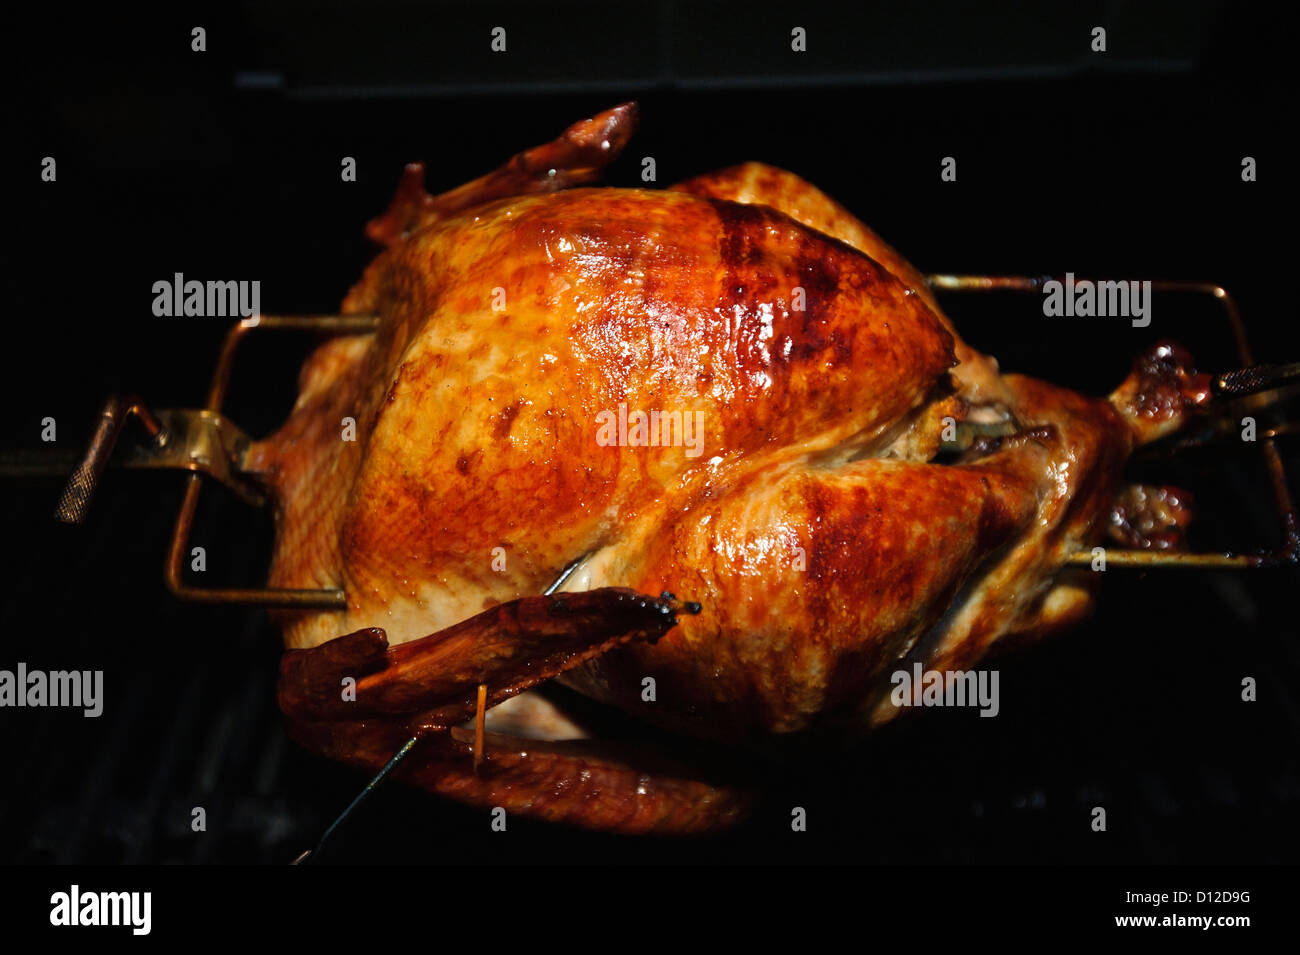 https://c8.alamy.com/comp/D12D9G/thanksgiving-turkey-on-the-barbecue-this-turkey-was-cooked-on-a-rotisserie-D12D9G.jpg